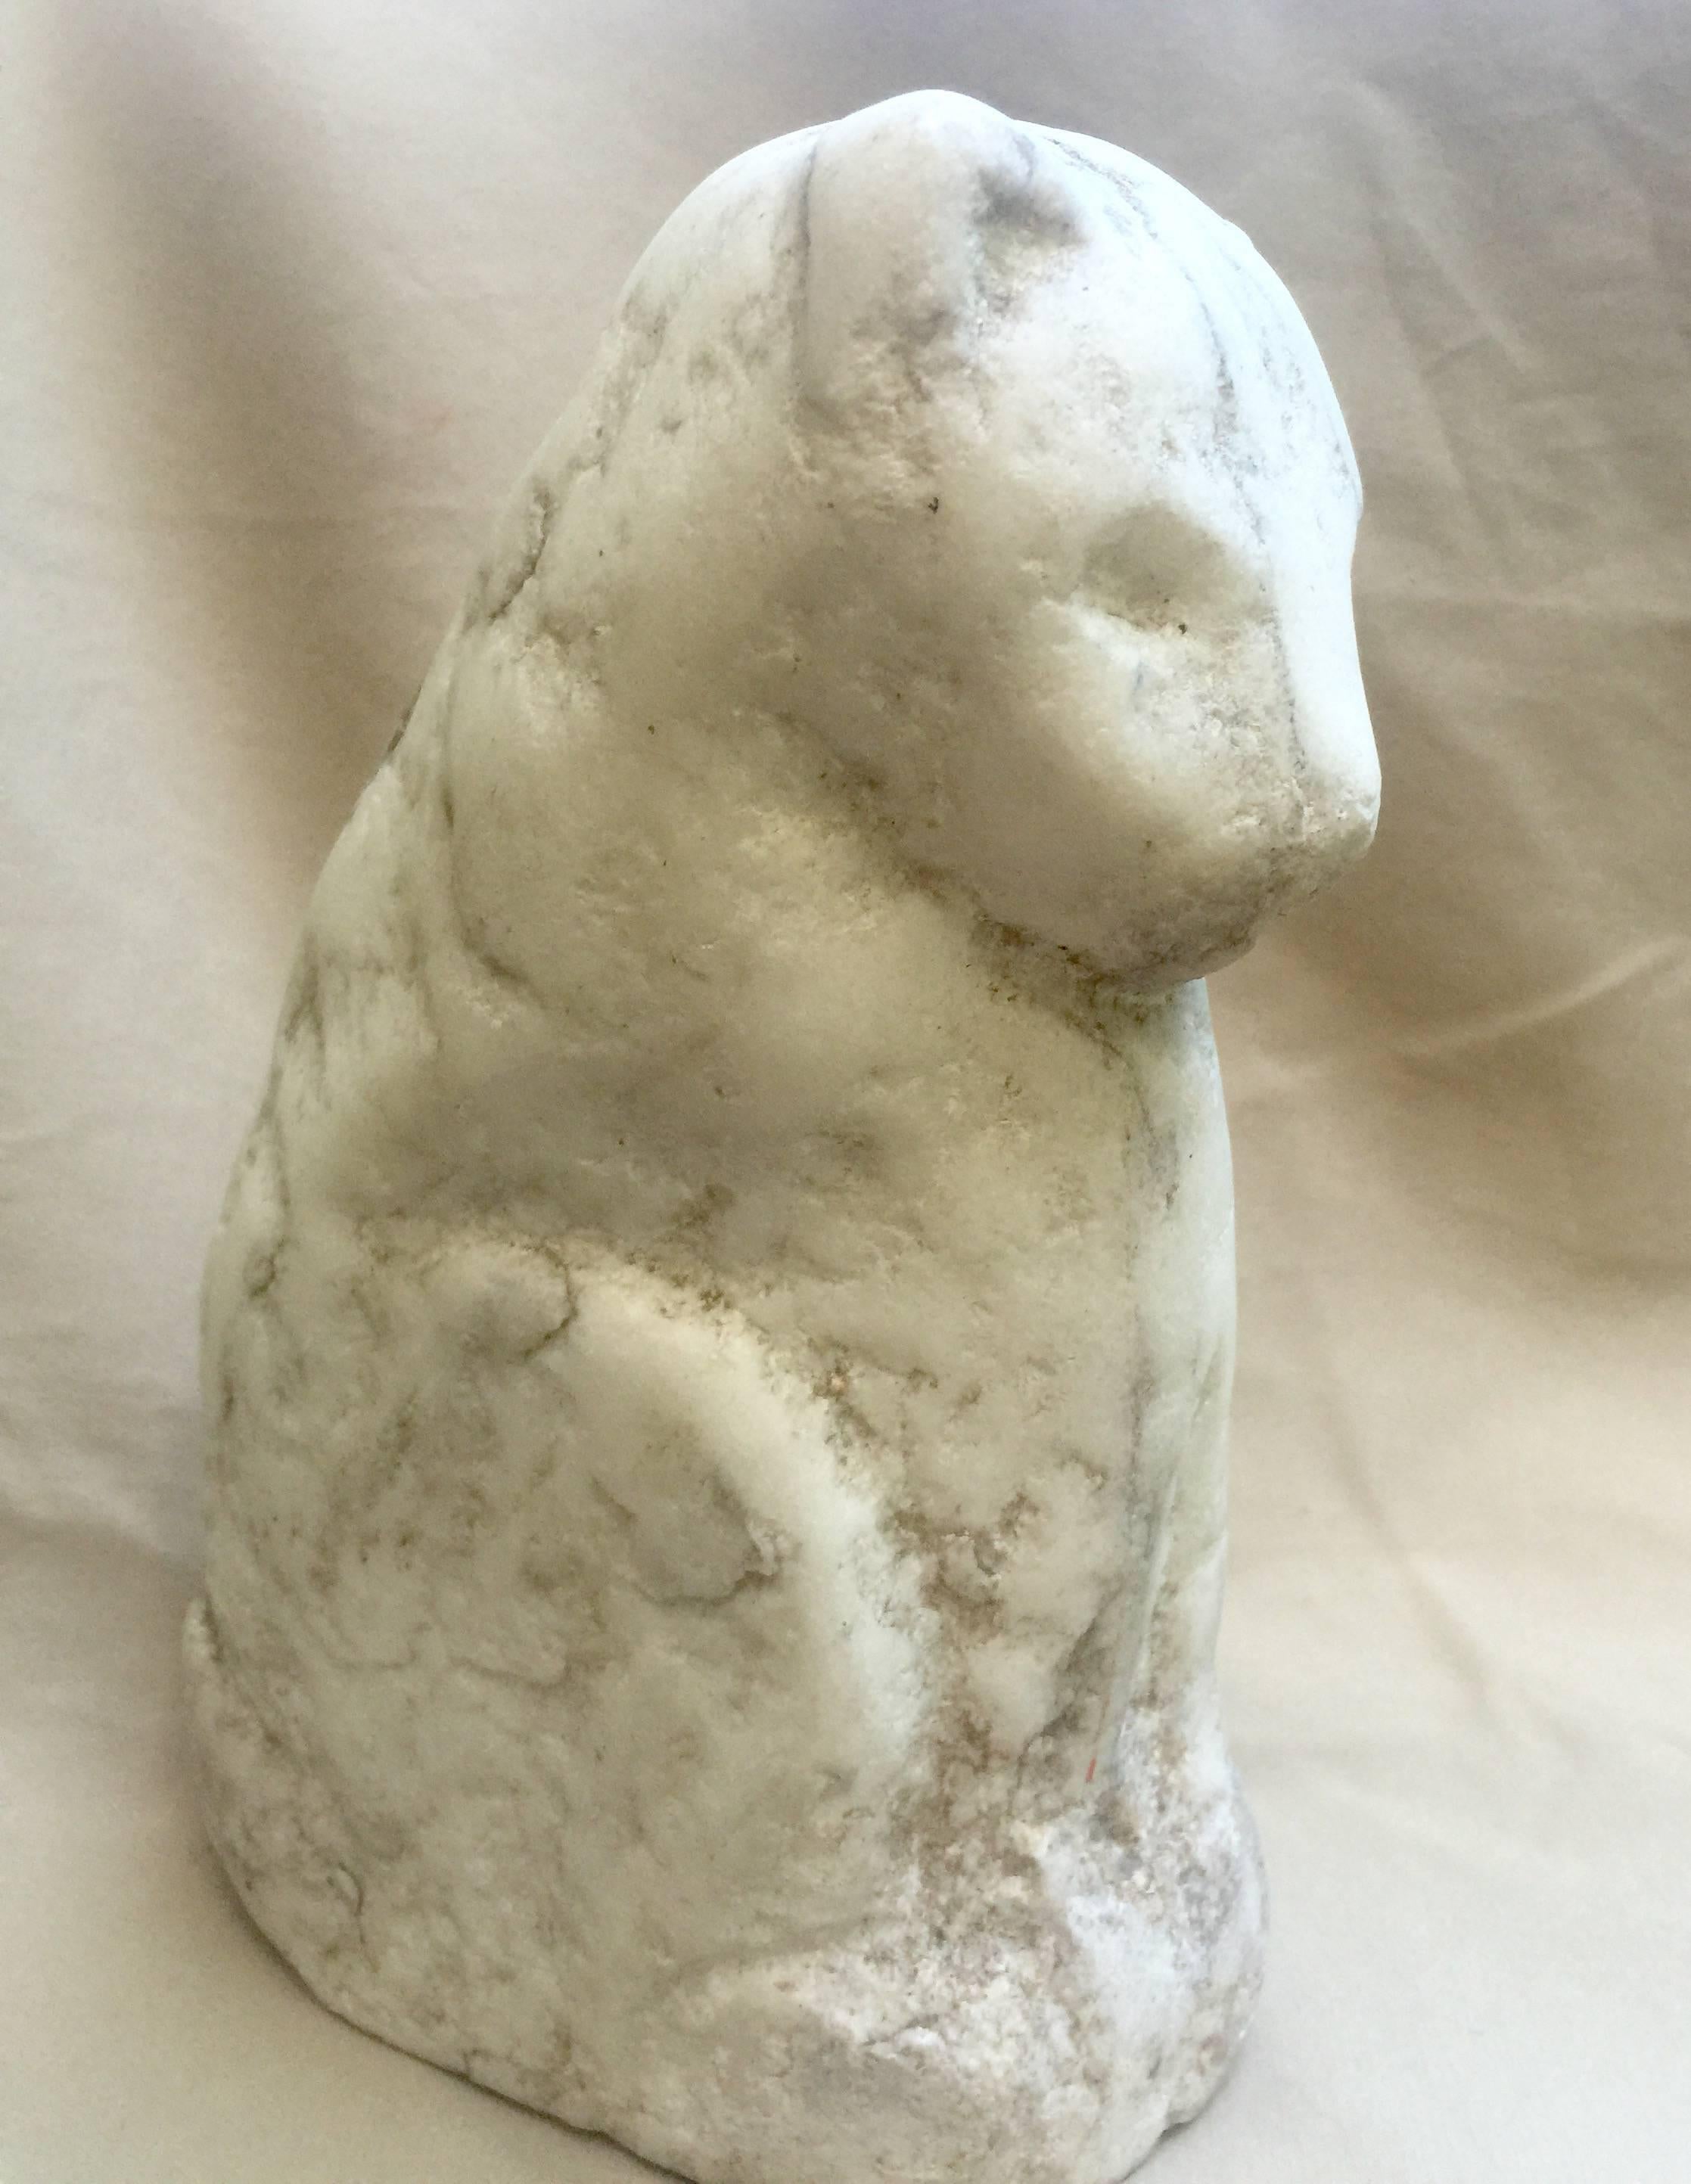 Beautifully conceived small marble carving of a seated cat. Abstracted figure carved from marble with details pared to the essential forms. Found in New England and likely dating to the late 19th-early 20th century.